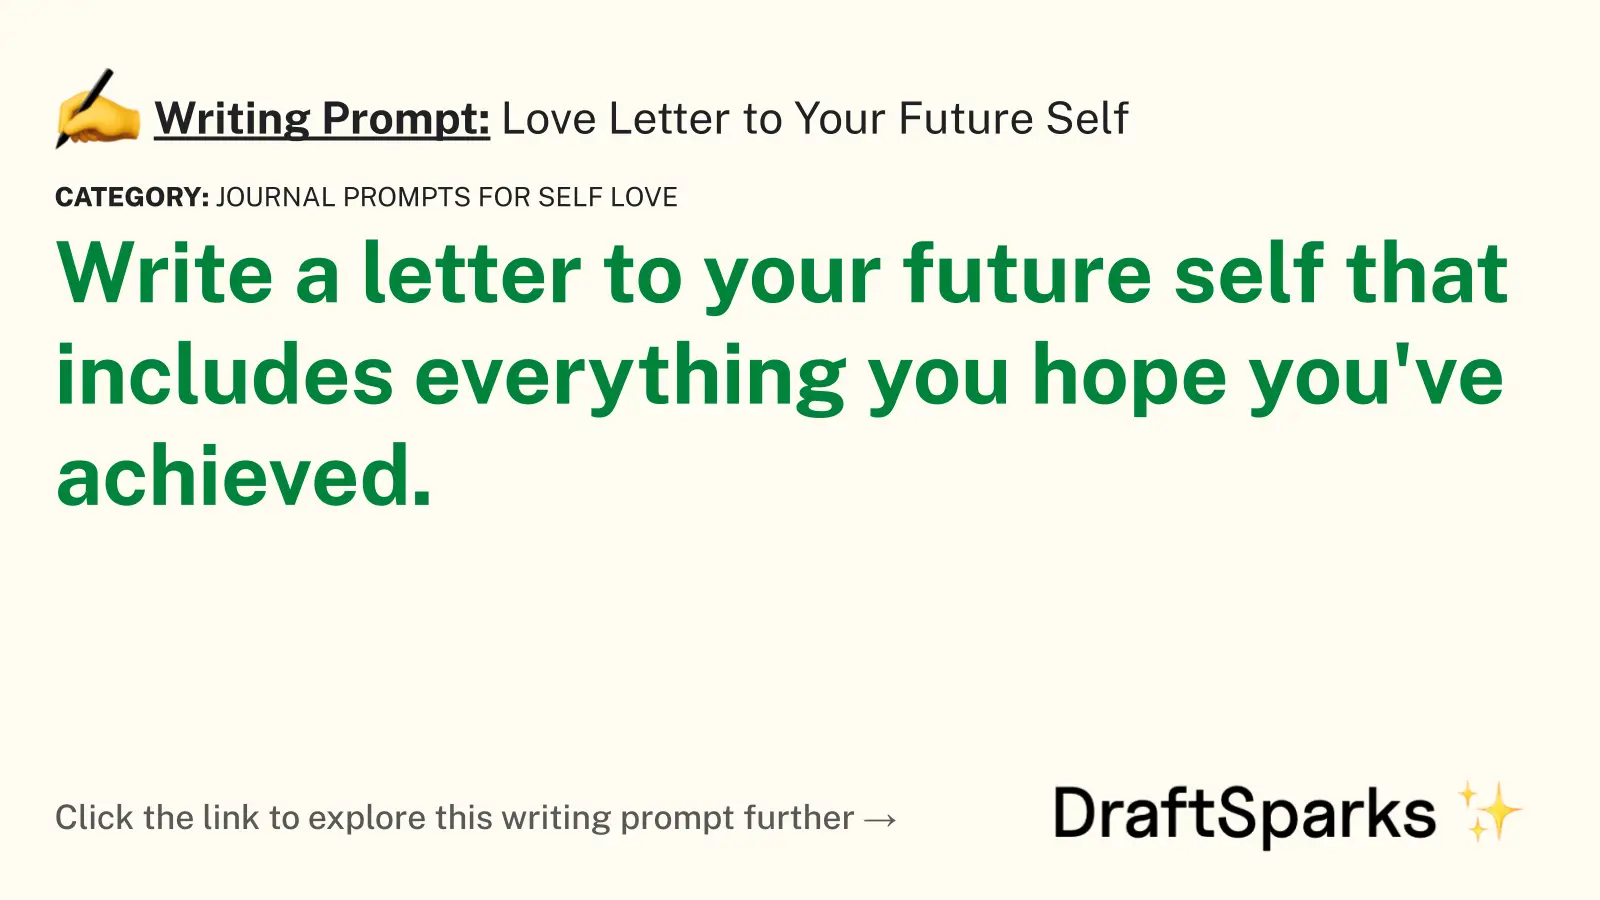 Love Letter to Your Future Self